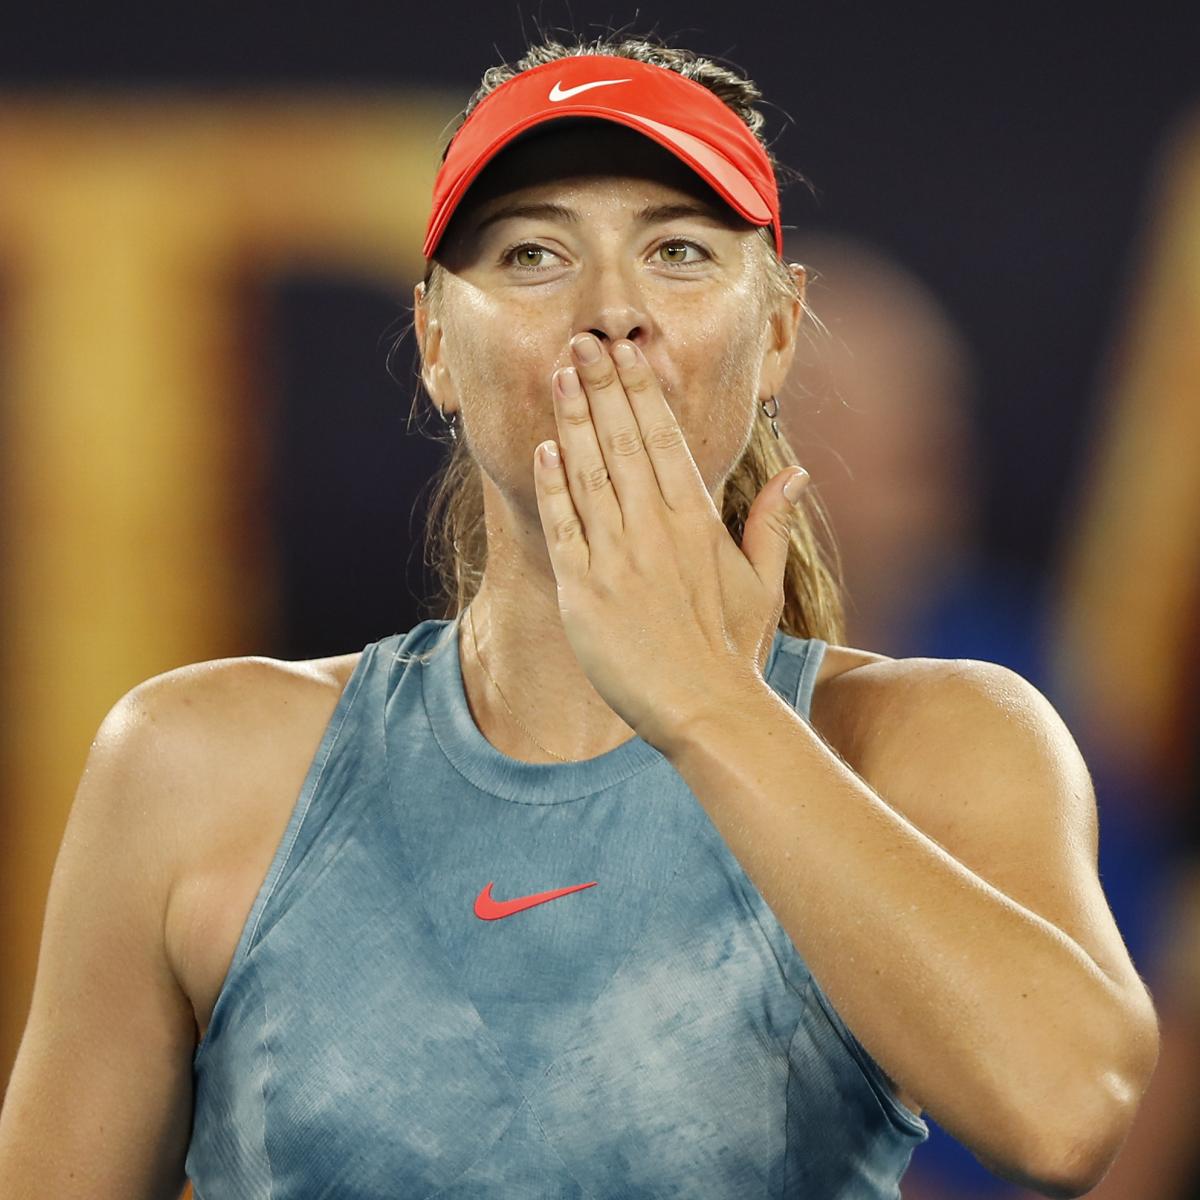 Australian Open 2019 Results: Scores, Stats from Friday's Bracket | Bleacher Report | Latest News, Videos and Highlights